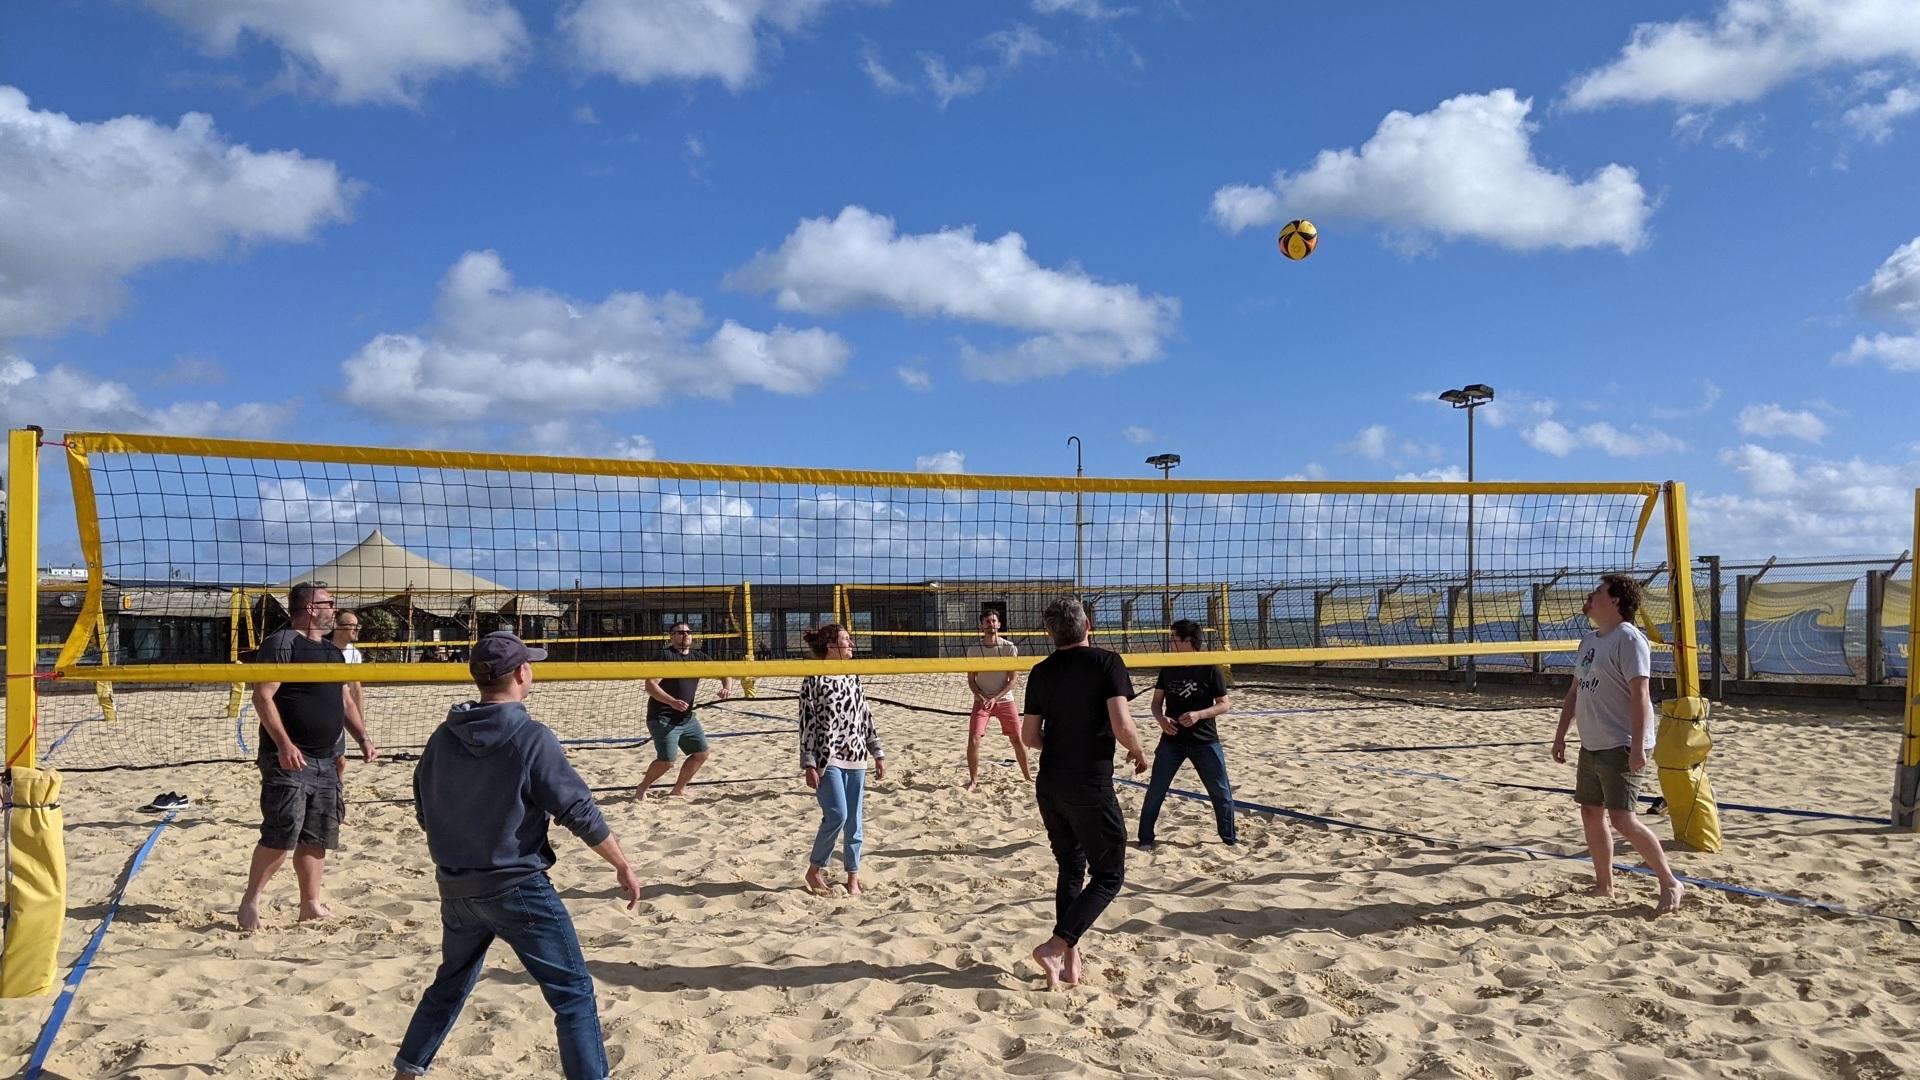 The Brightec team playing Volleyball together